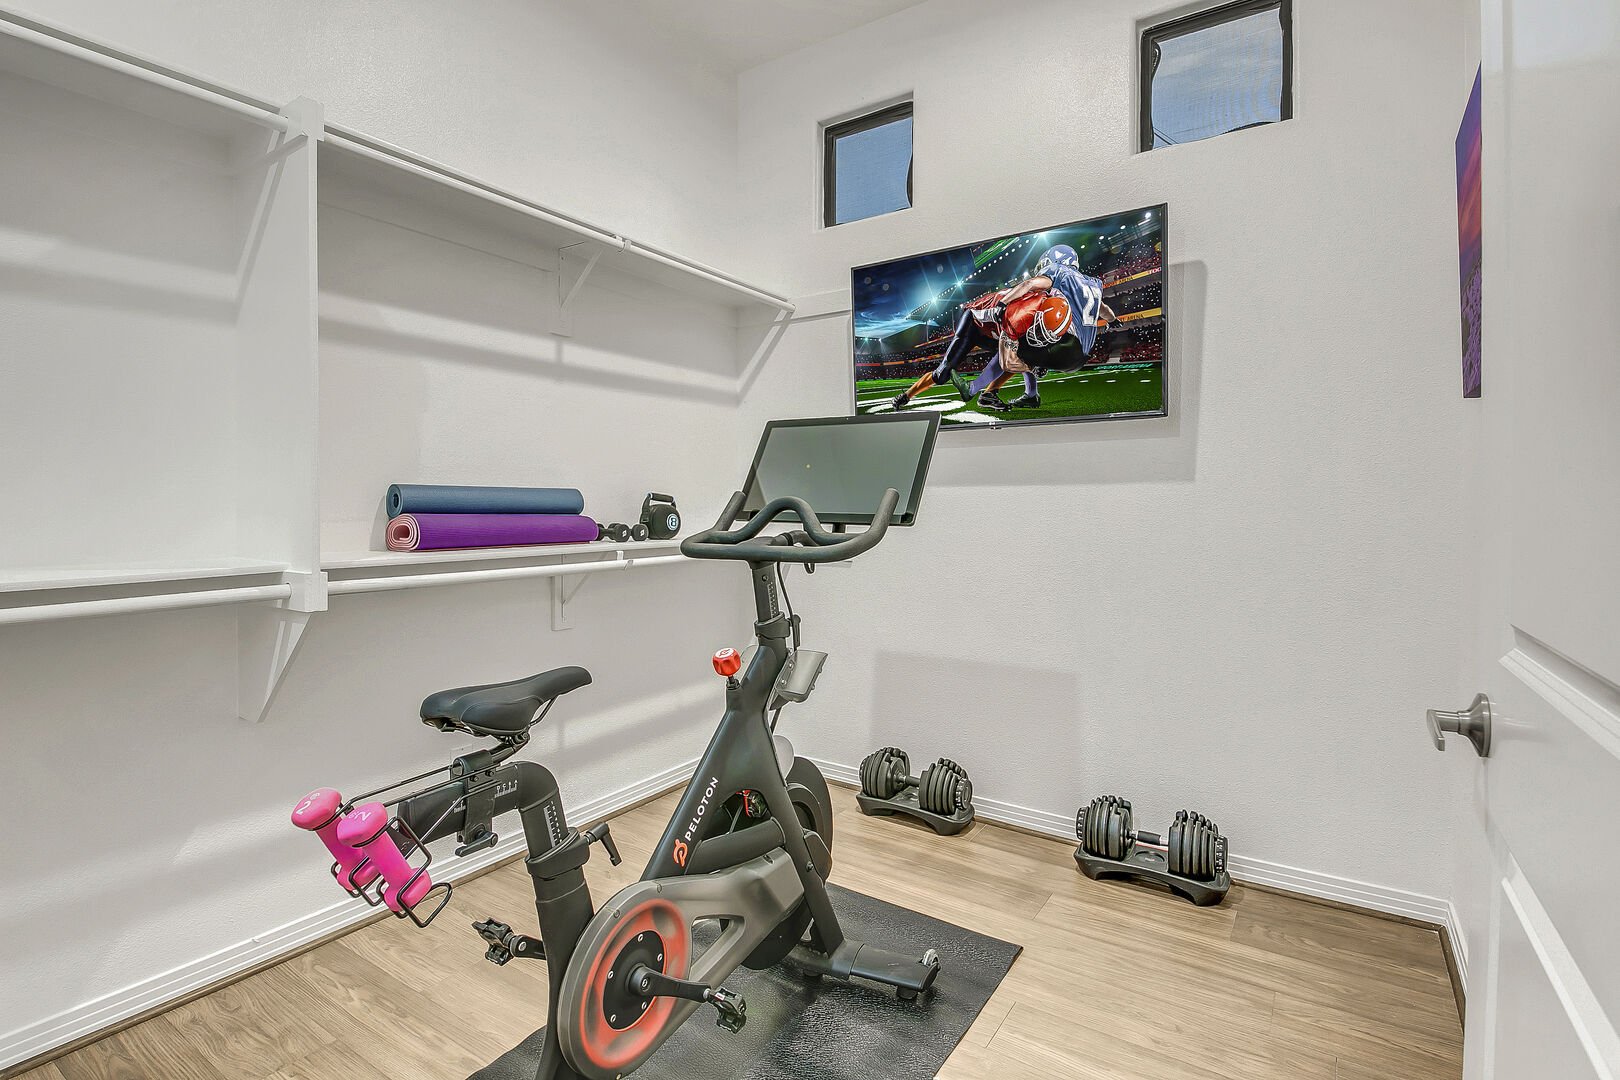 Master bedroom has an exercise room with a Peloton bike, adjustable weights, two yoga mats, and 48 inch LG TV.